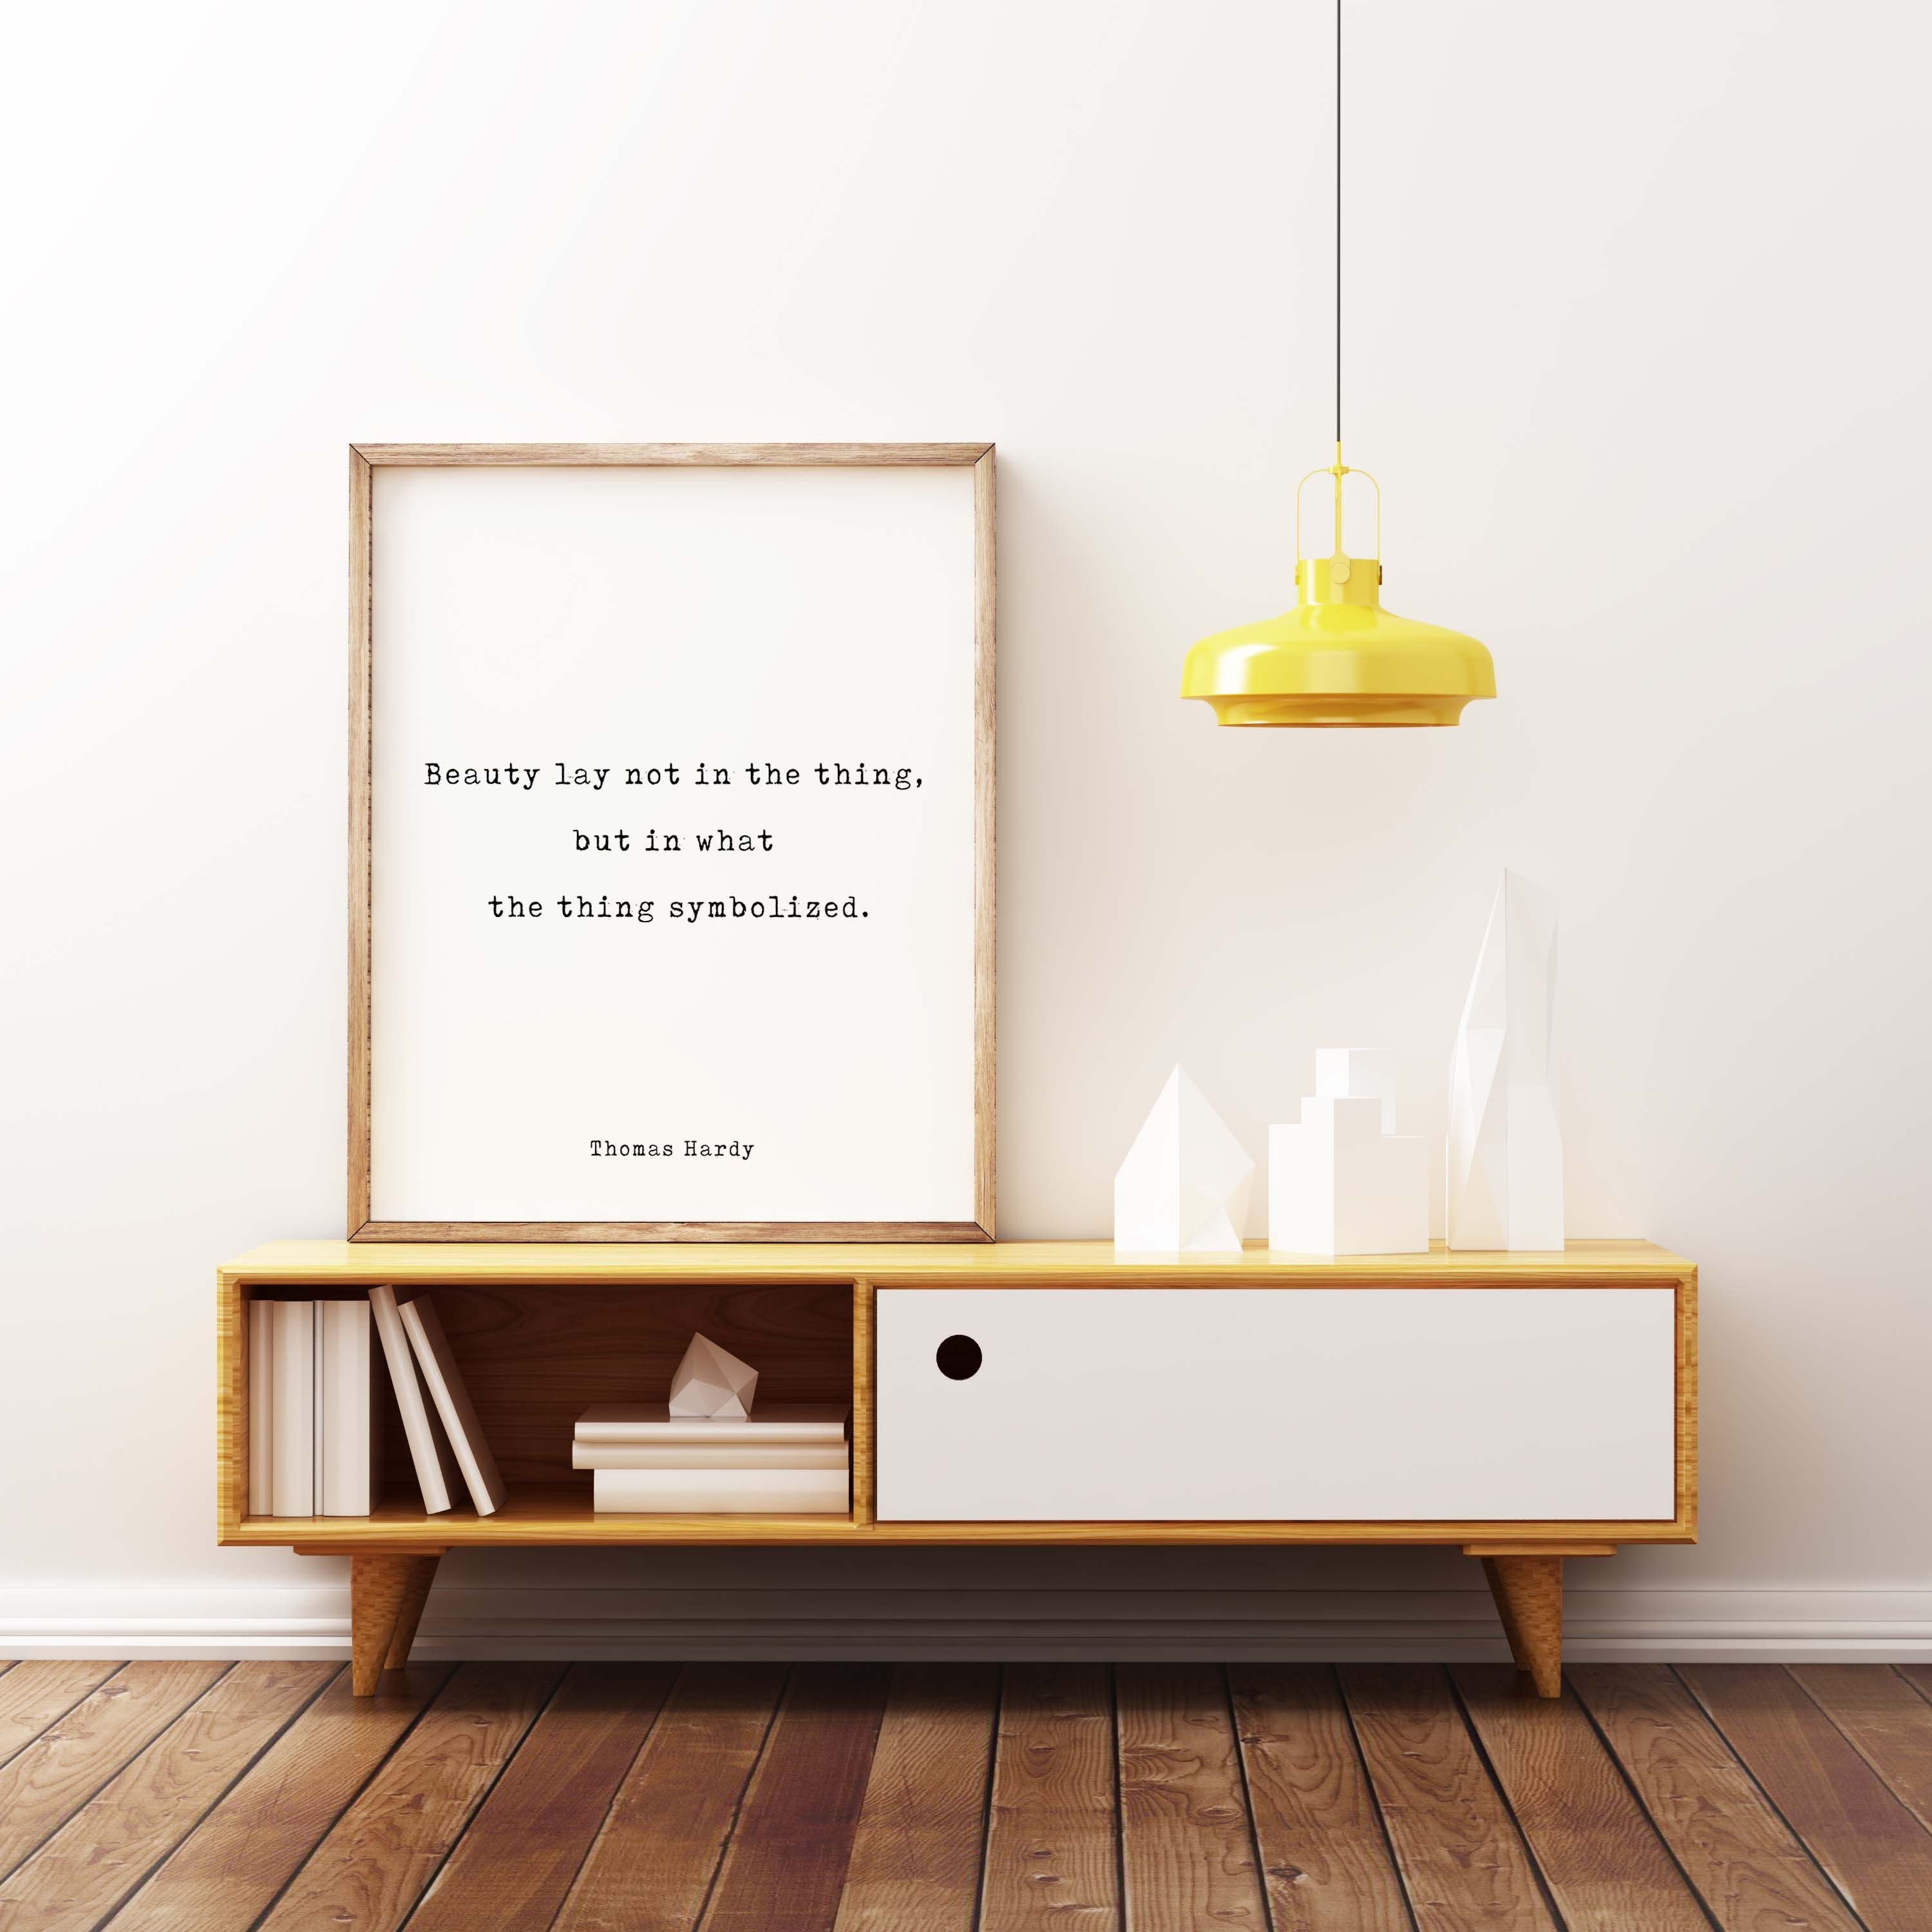 Thomas Hardy Quote Print, Beauty Lay Not In The Thing, But In What The Thing Symbolized, Modern Minimalist Art, Inspirational, Unframed - BookQuoteDecor